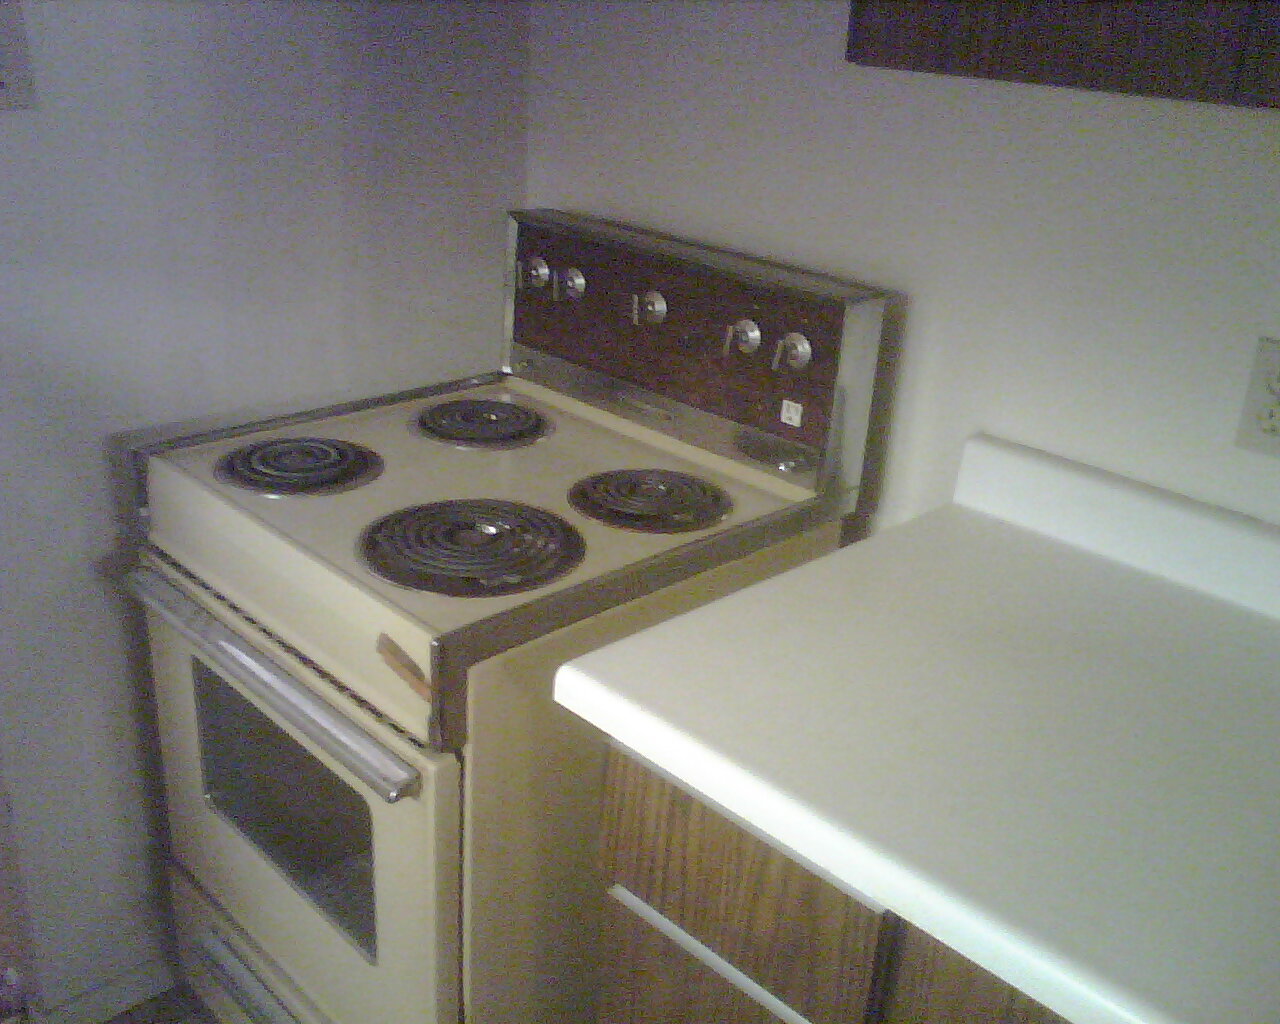 Kitchen stove as seen from near the kitchen sink